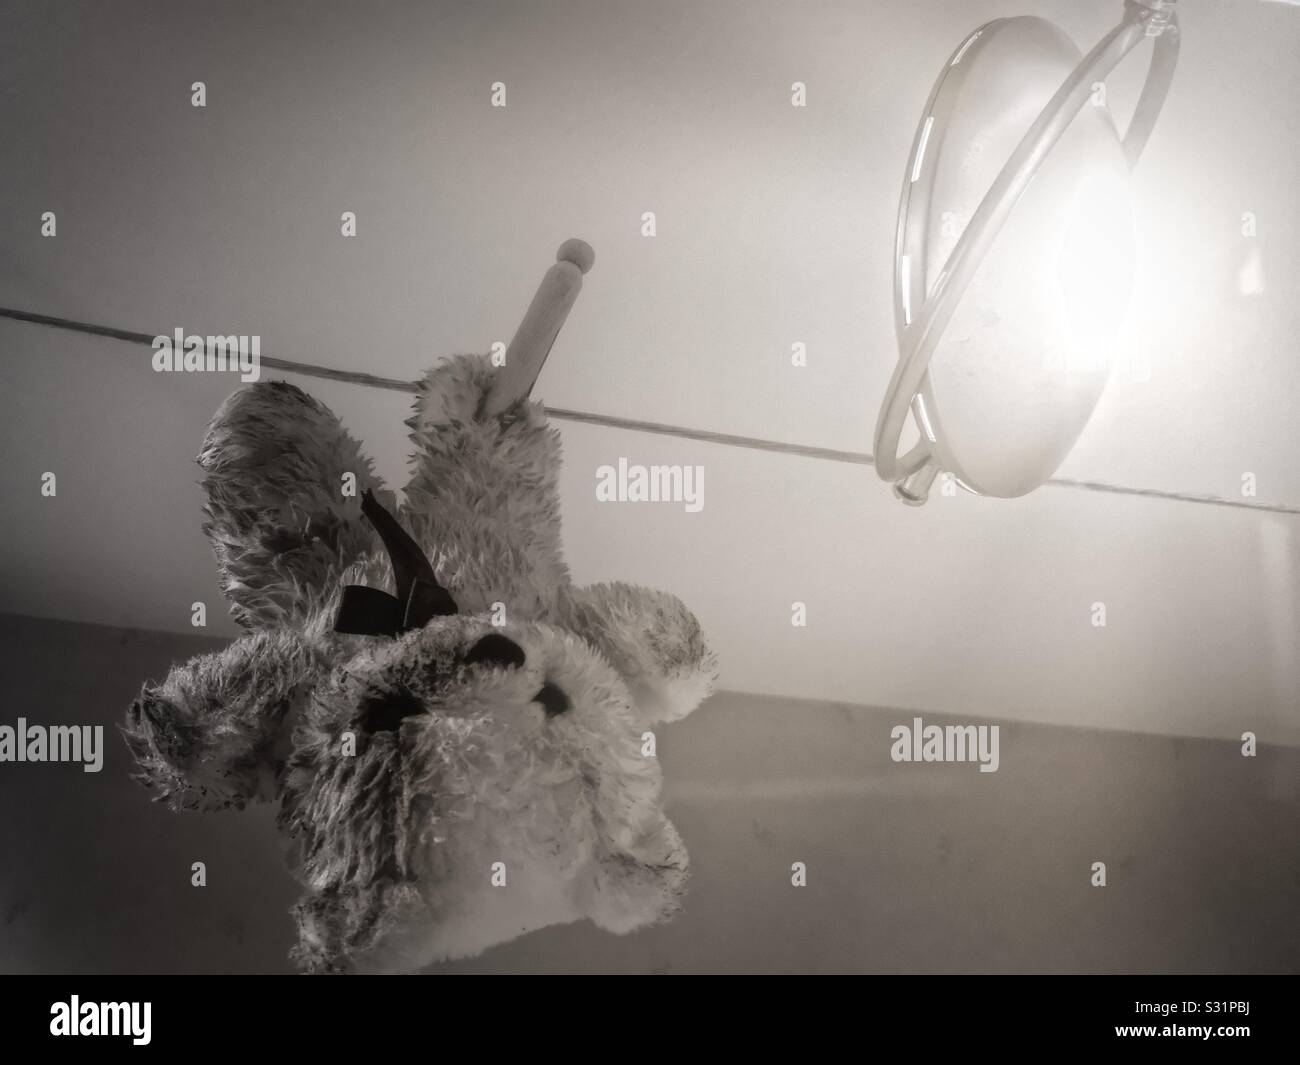 Wet teddy bear hanging upside down from light system to dry Stock Photo